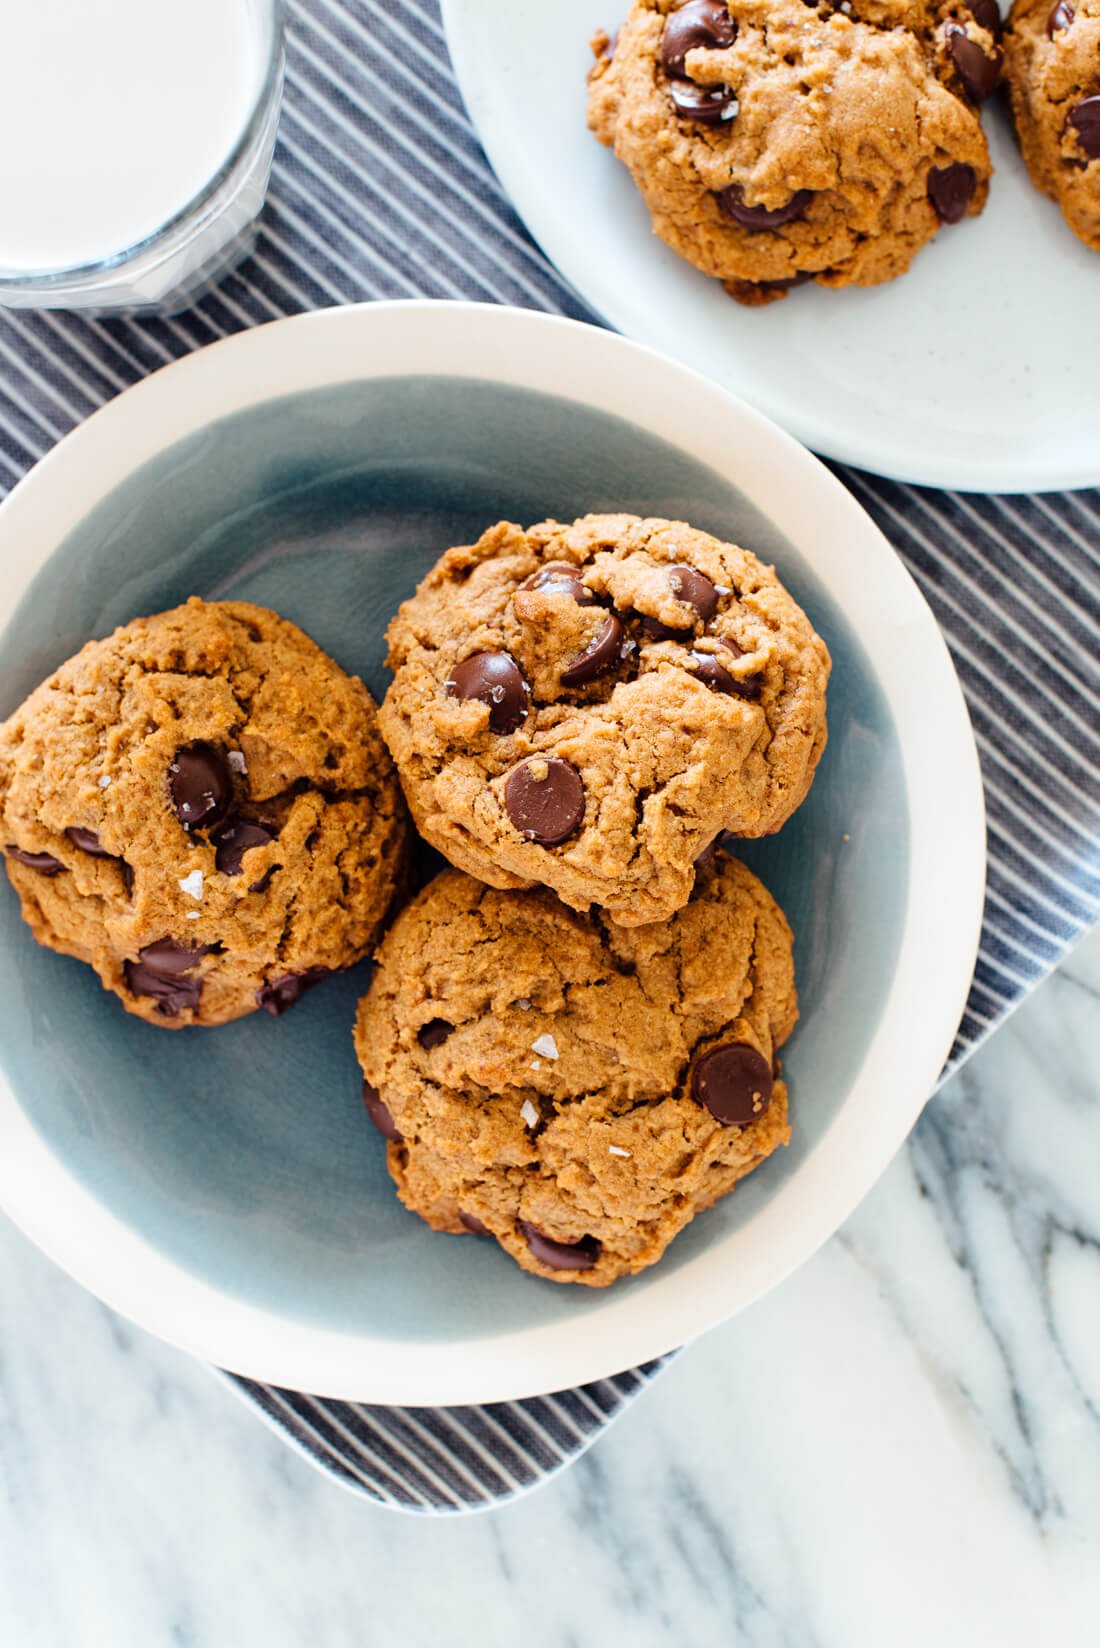 The most amazing chocolate chip cookies recipe (easy to make, no mixer required, and no butter or eggs, either!) You won't believe it until you try them for yourself! #chocolatechipcookies #cookierecipe #vegancookies #bestcookies #cookieandkate